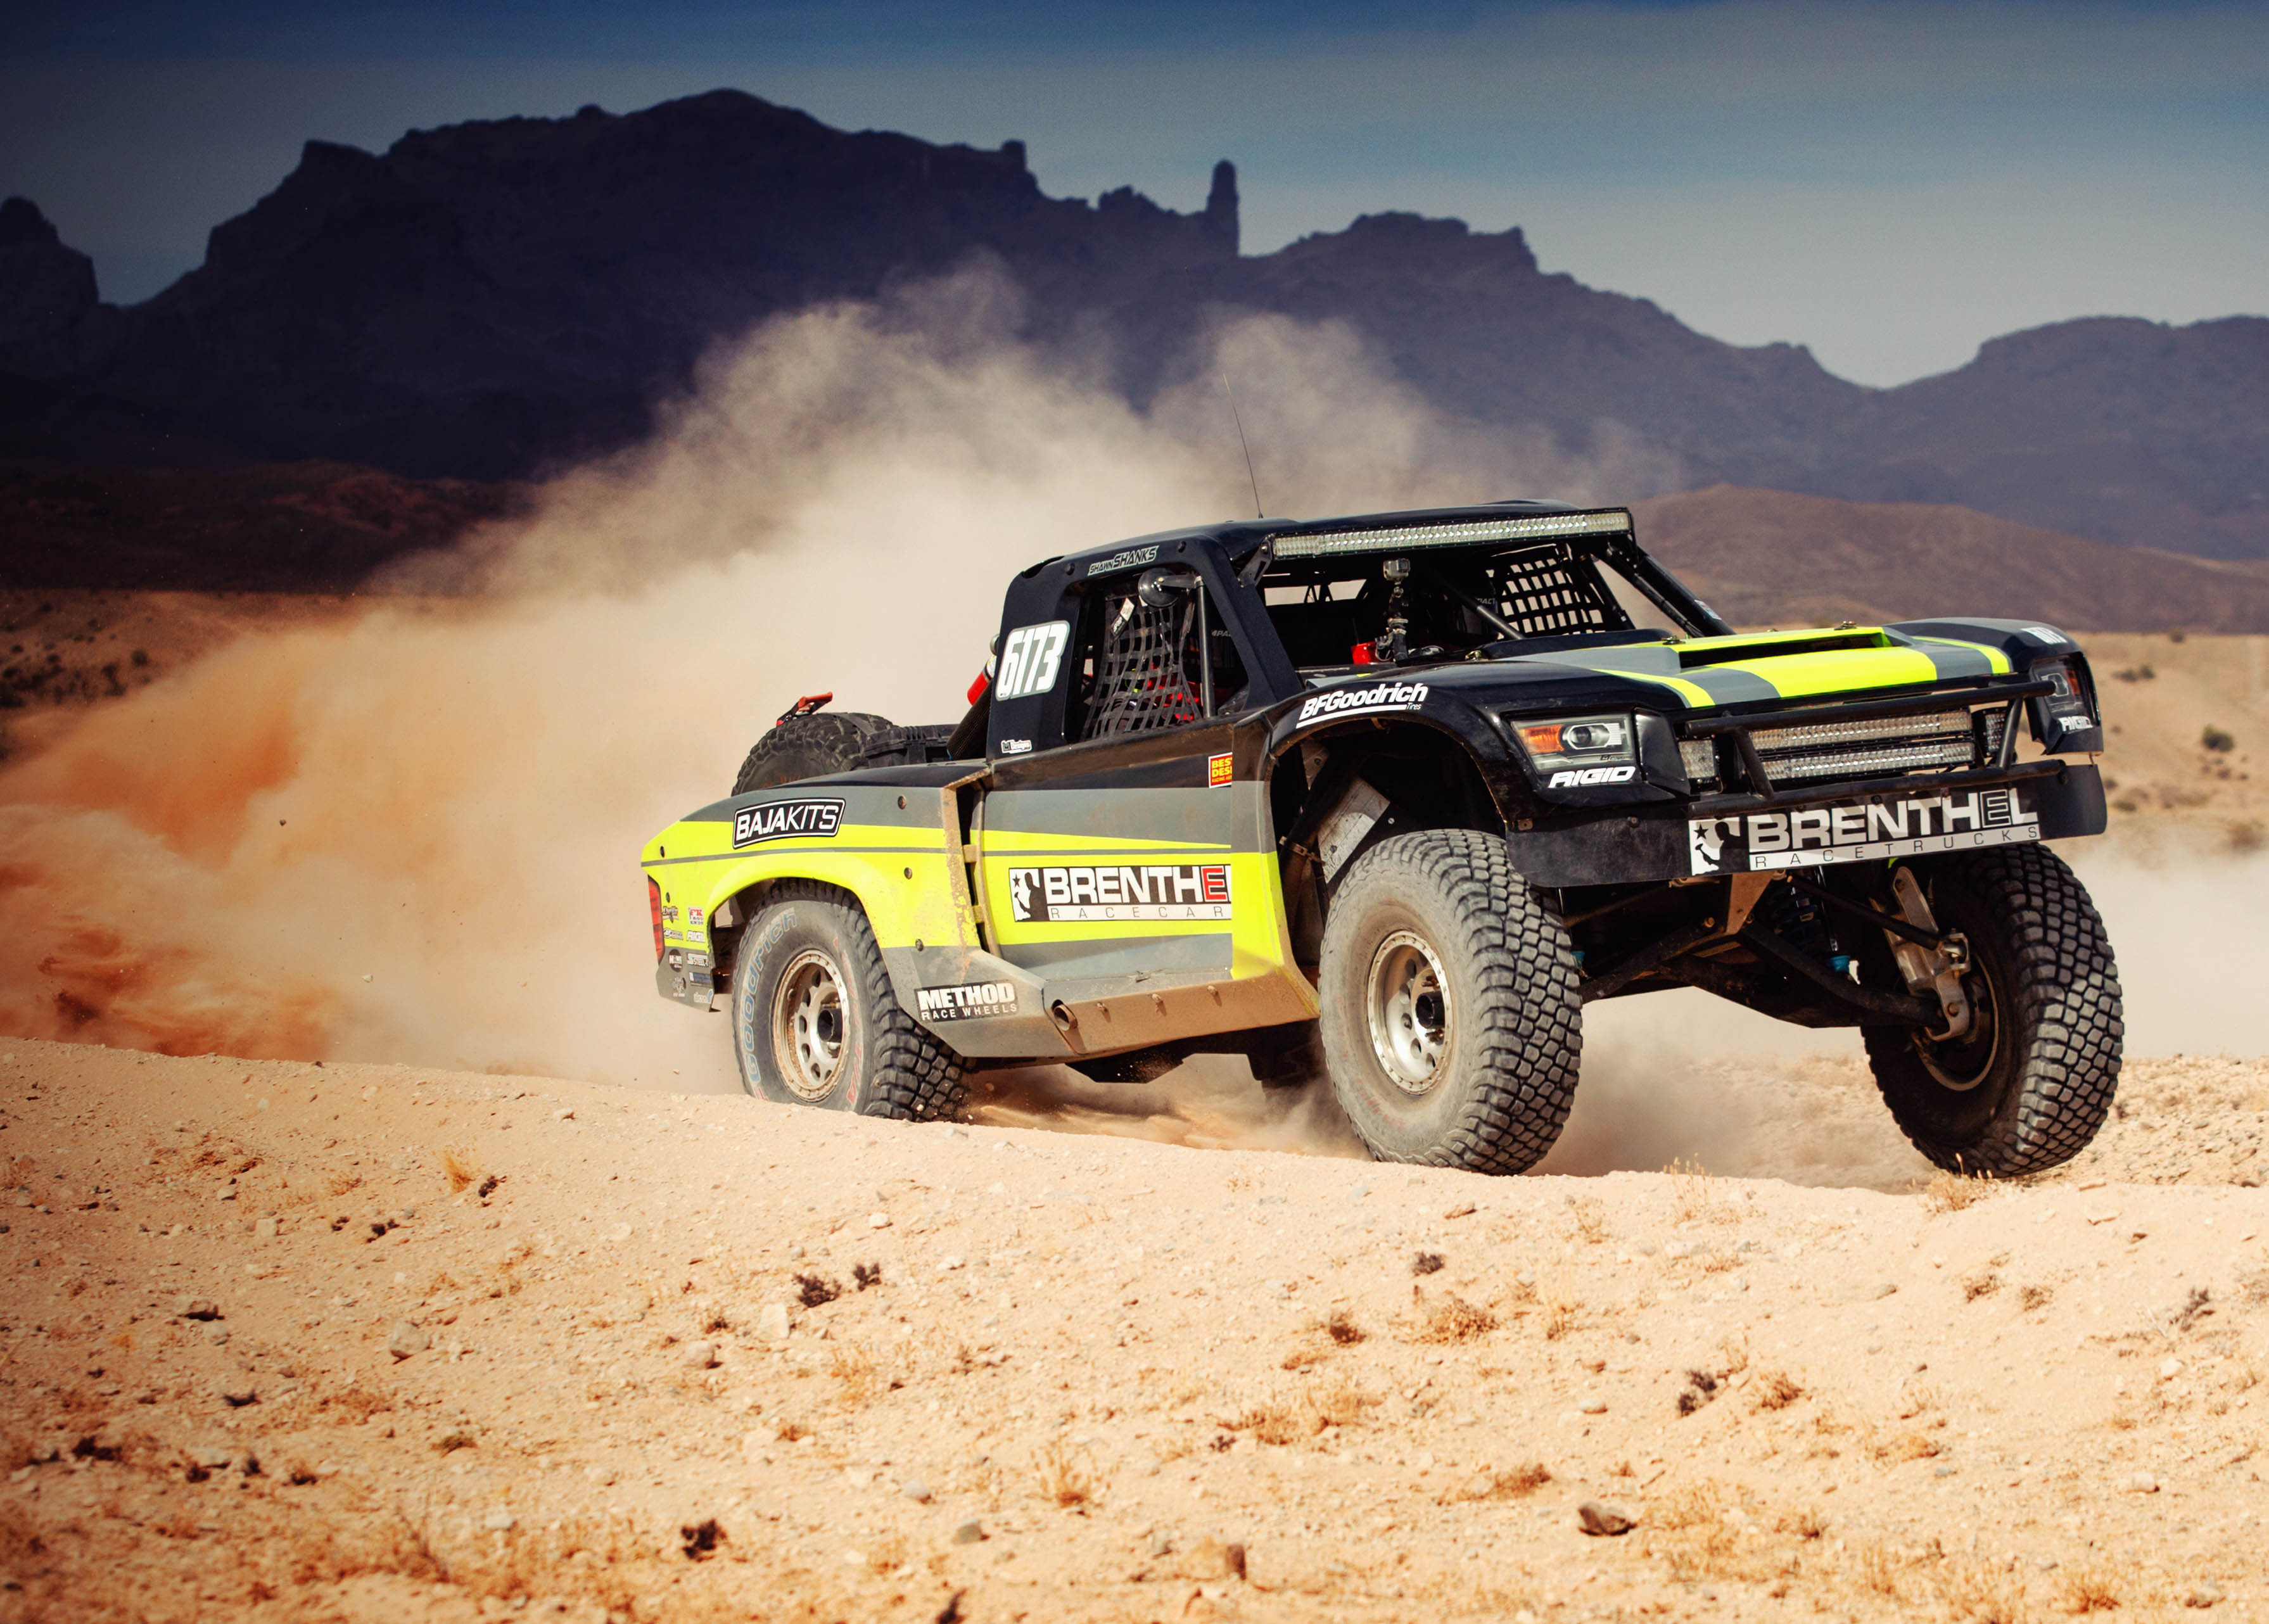 Bi Trophy truck racing on a desert dirt road while leaving behind a large cloud of dust